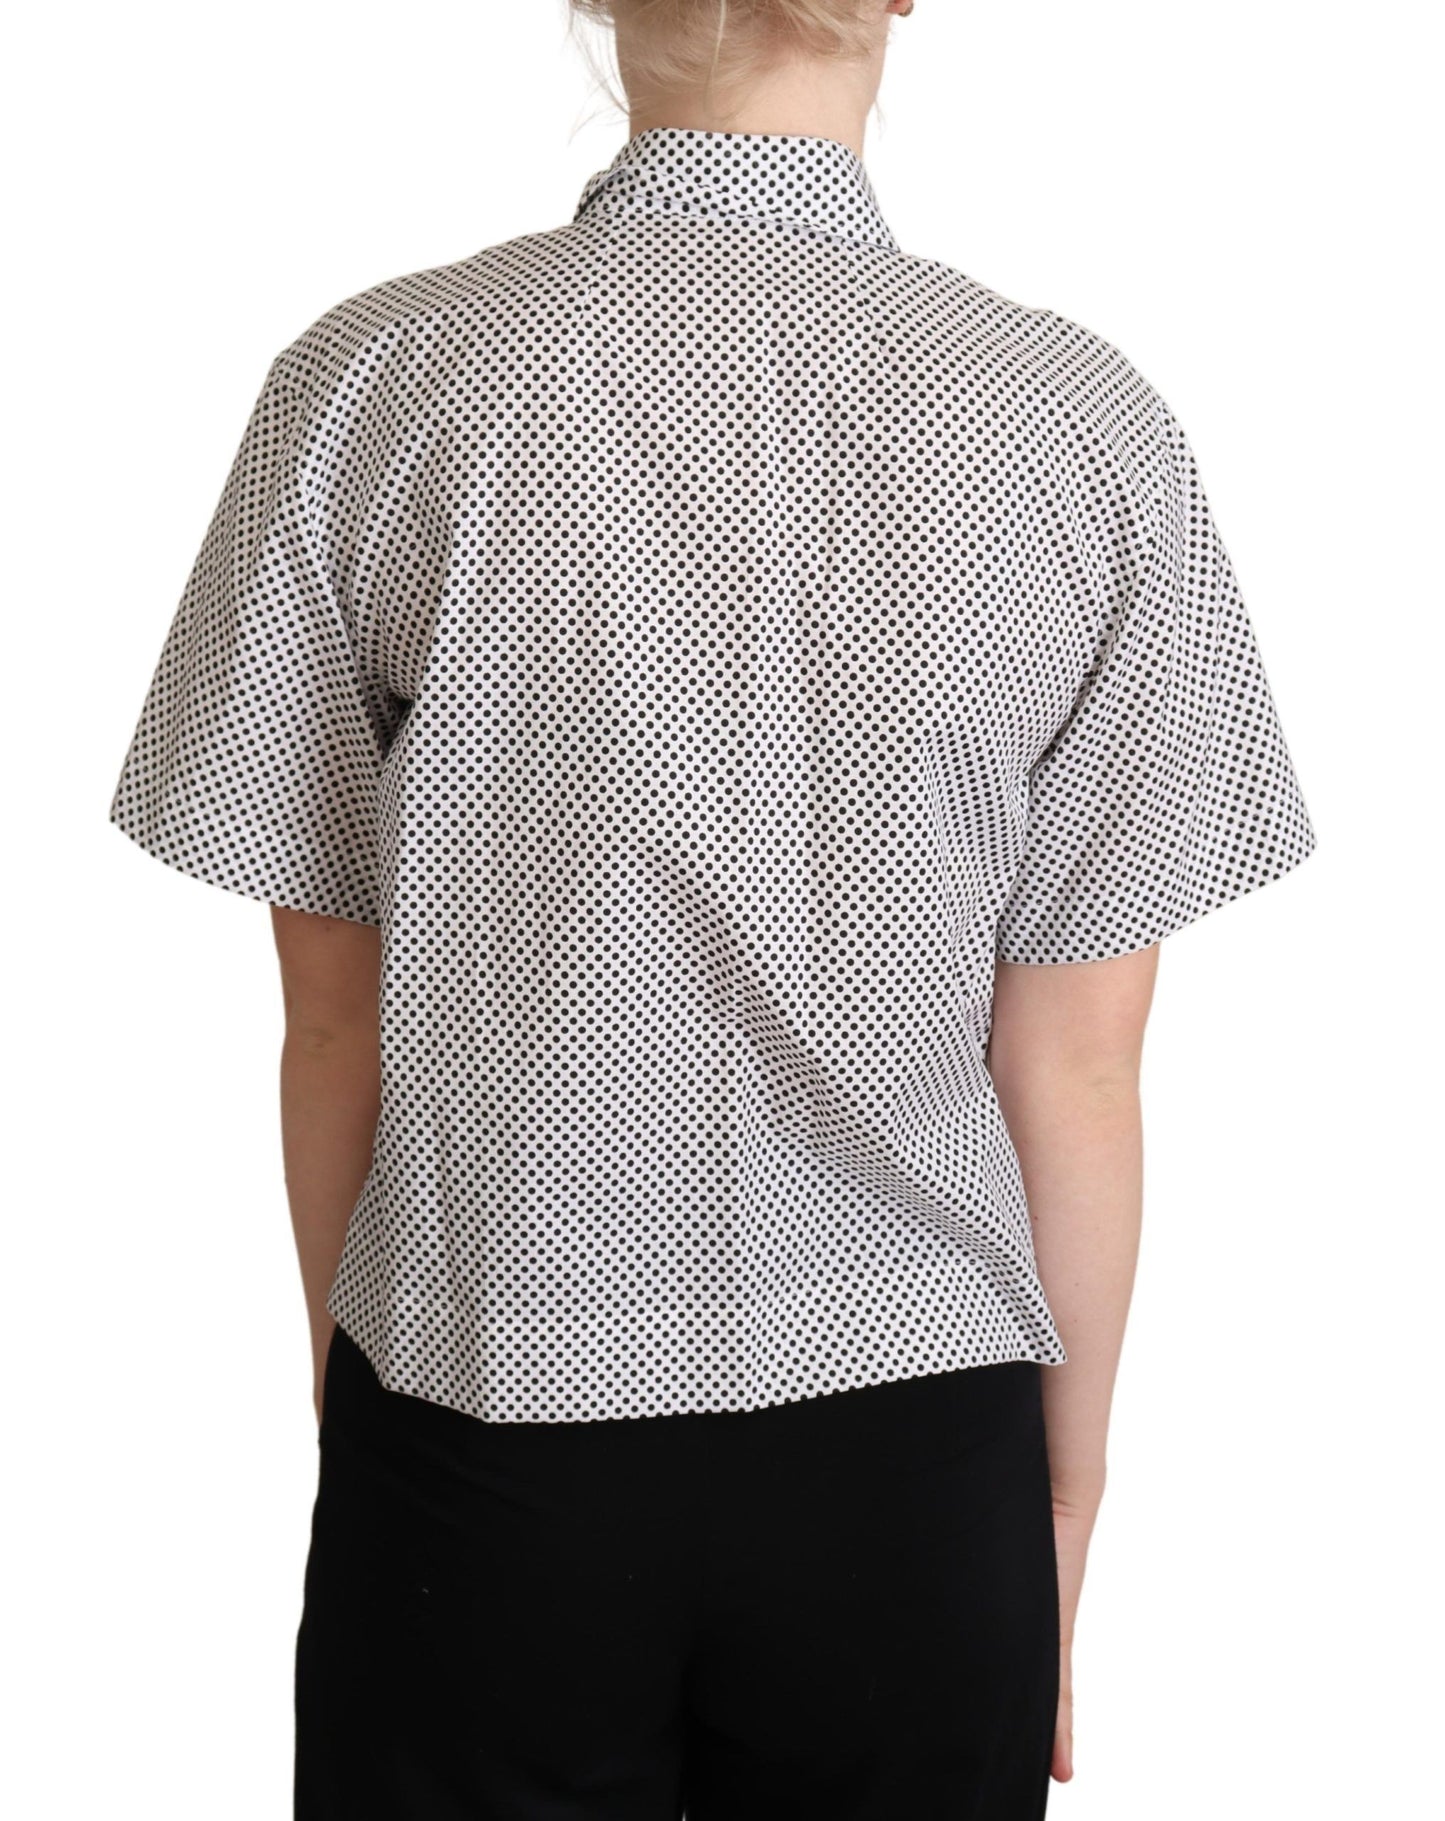 Black Polka Dot Collared Shirt White - Designed by Dolce & Gabbana Available to Buy at a Discounted Price on Moon Behind The Hill Online Designer Discount Store